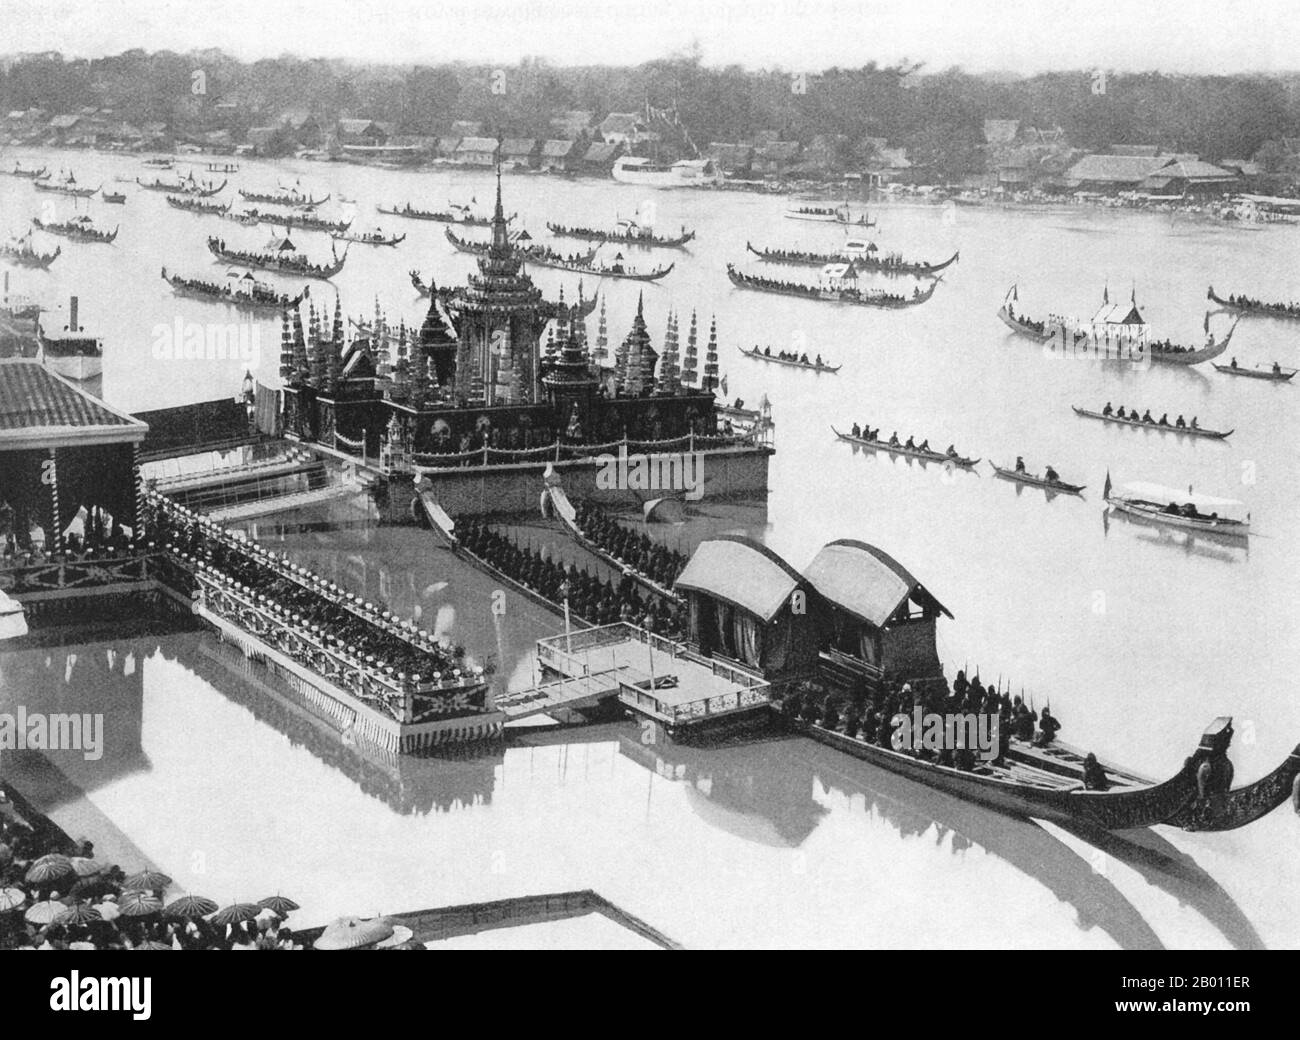 Thailand: Royal on the Phraya River in Bangkok during the Thot Kathin ceremony, late 19th century. Thot Kathin is an important annual ceremony for Buddhists in Thailand and neighbouring